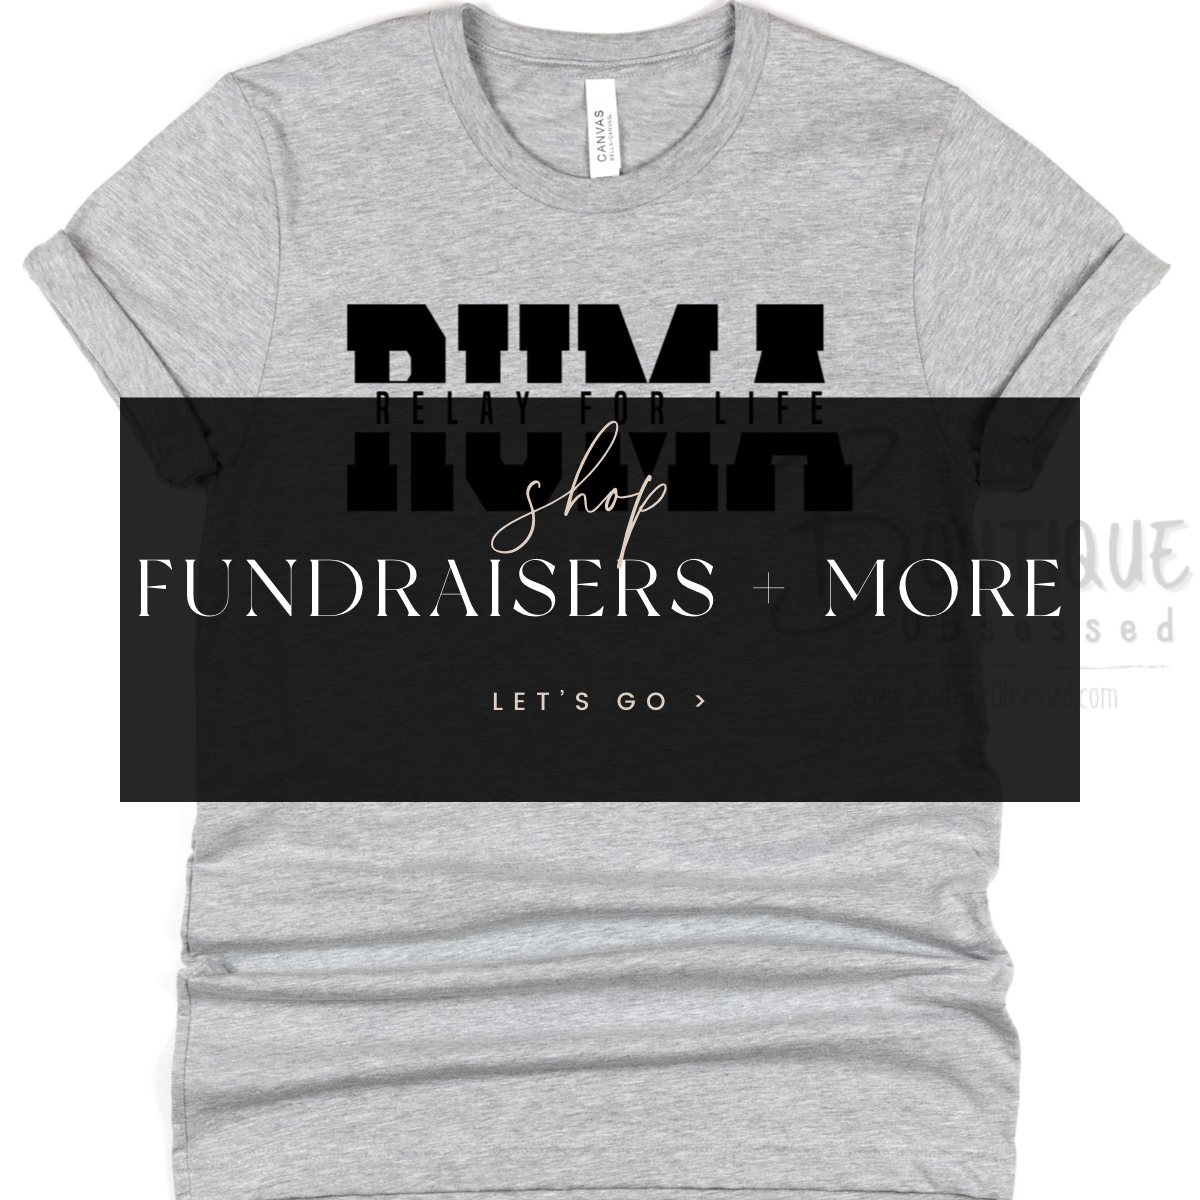 Fundraisers + More